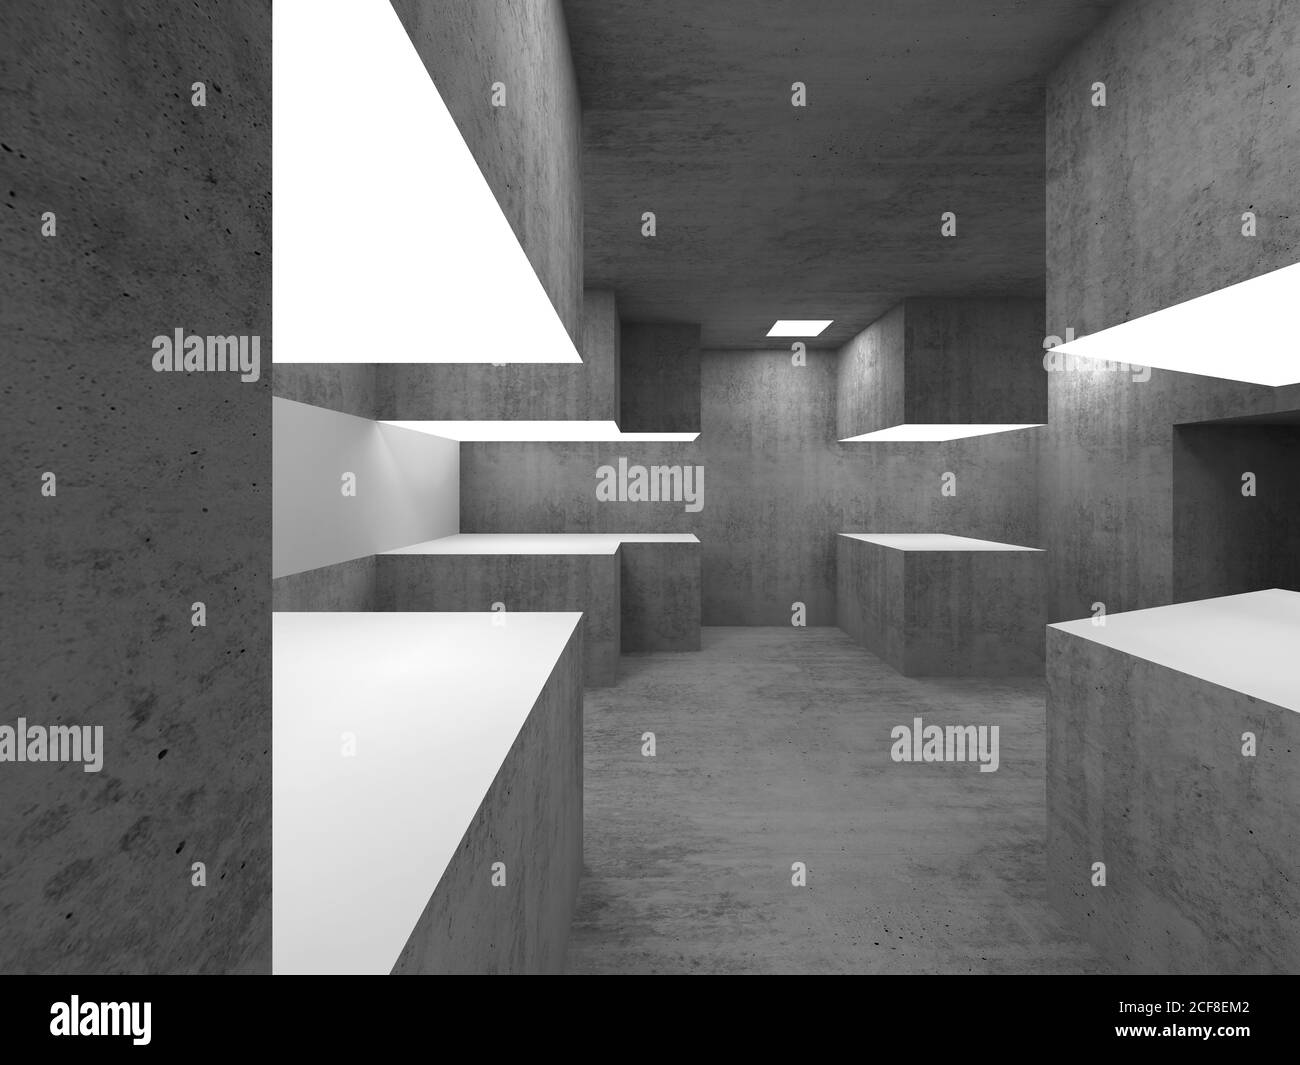 Empty concrete showroom interior with illuminated blank white exhibition stands. 3d rendering illustration Stock Photo